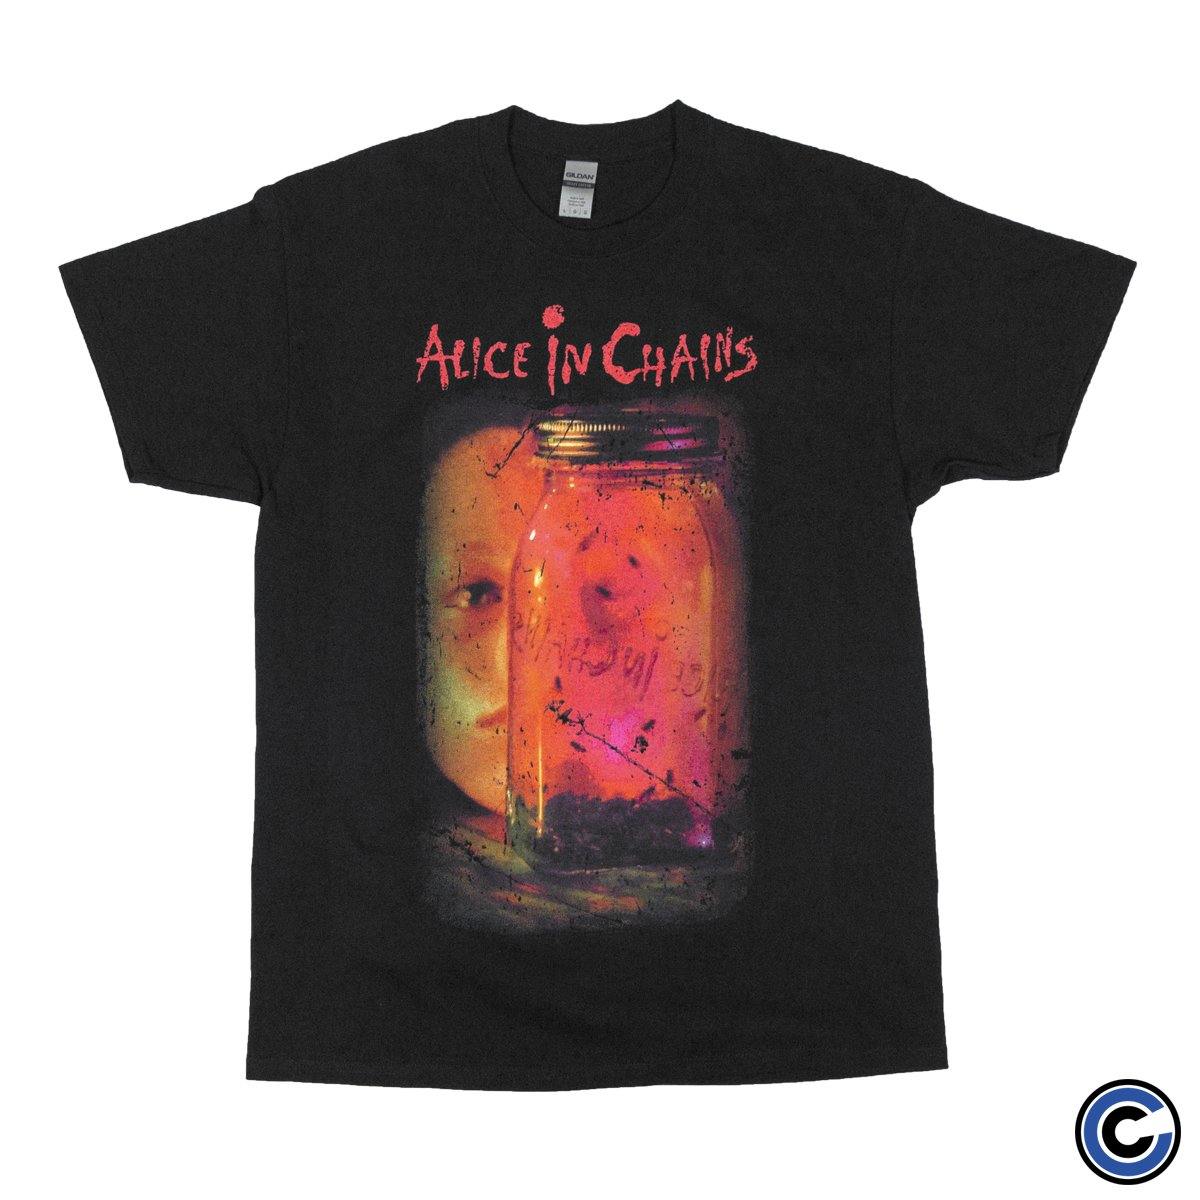 Buy – Alice In Chains "Jar of Flies" Shirt – Band & Music Merch – Cold Cuts Merch